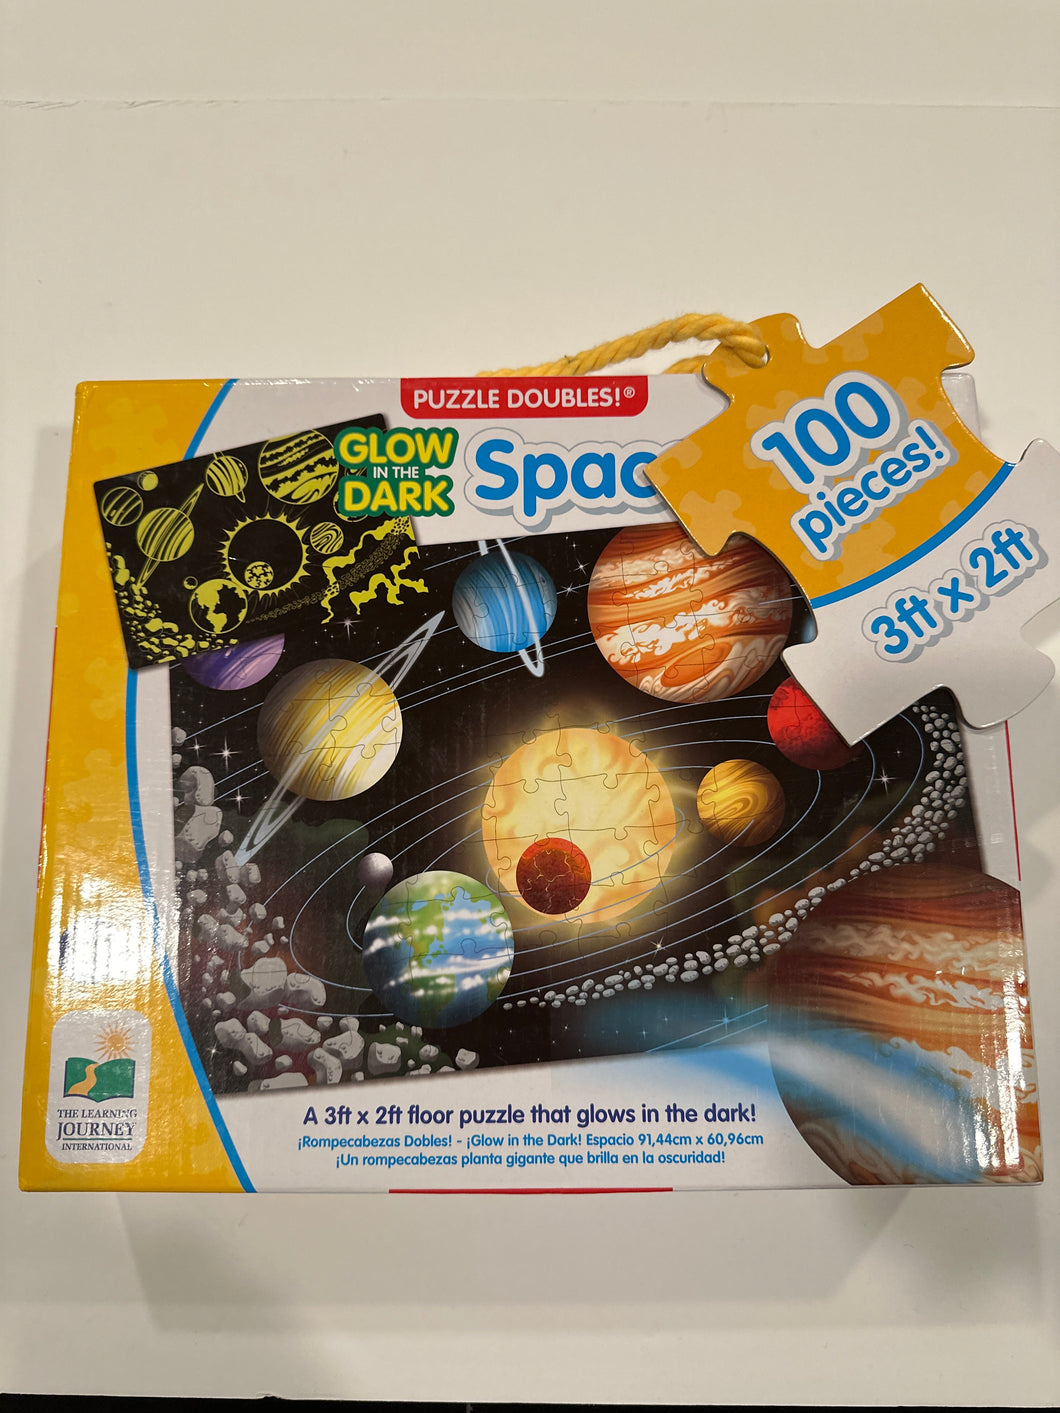 Glow in the dark space puzzle-100 pieces (all accounted for)